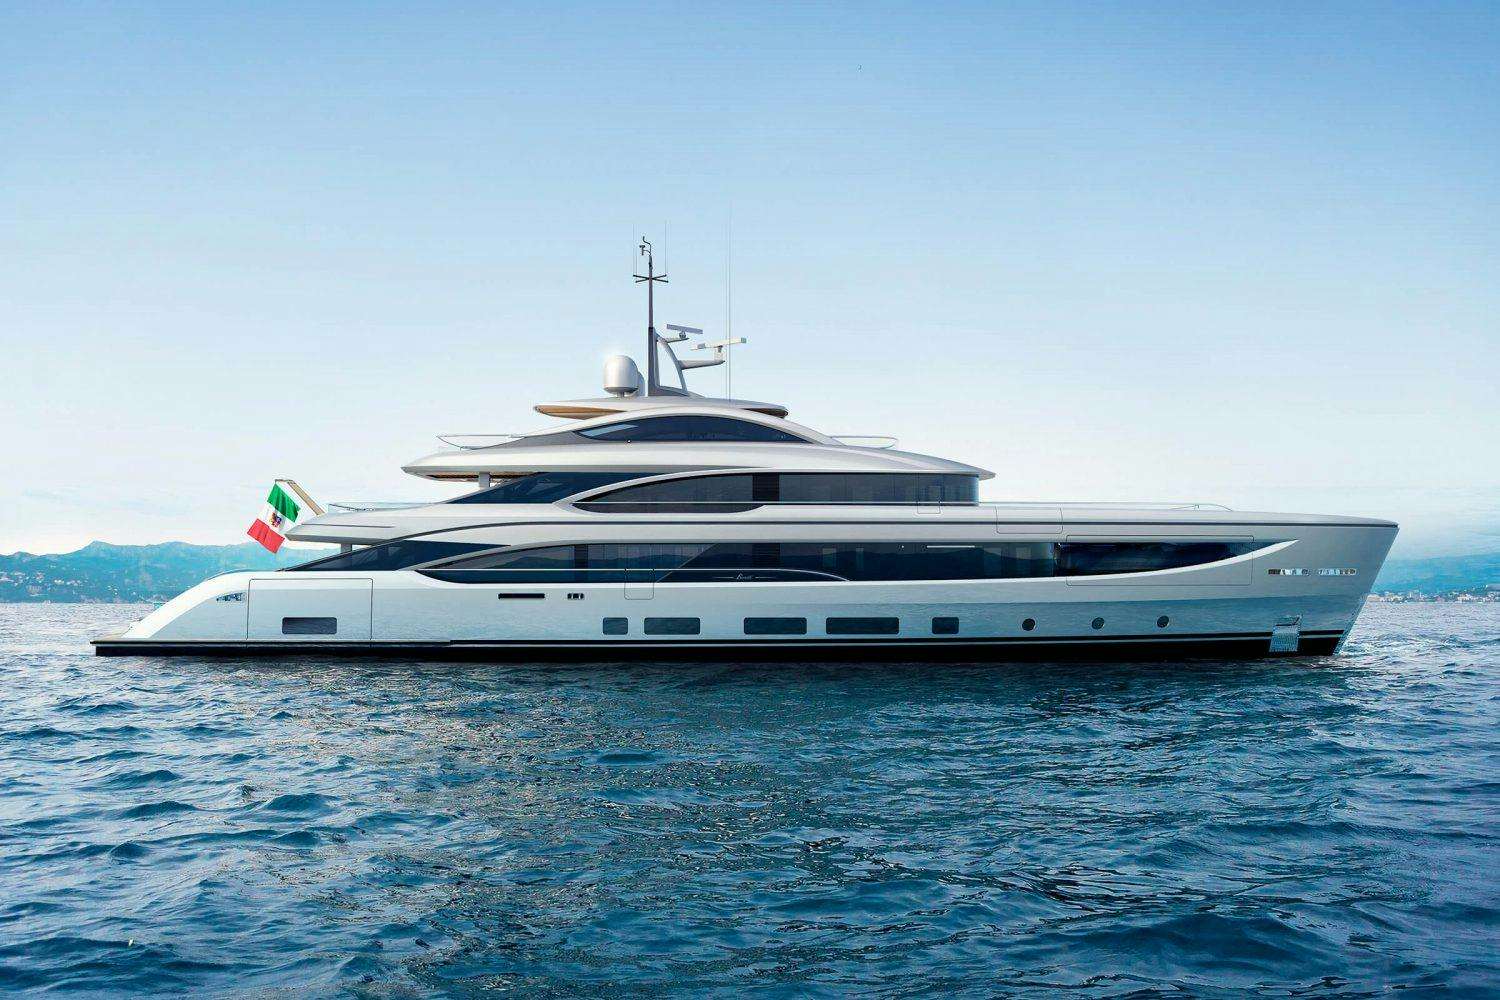 SILVER LINING Yacht for Charter, 164' (49.99m) 2016 6 Cabins Christensen